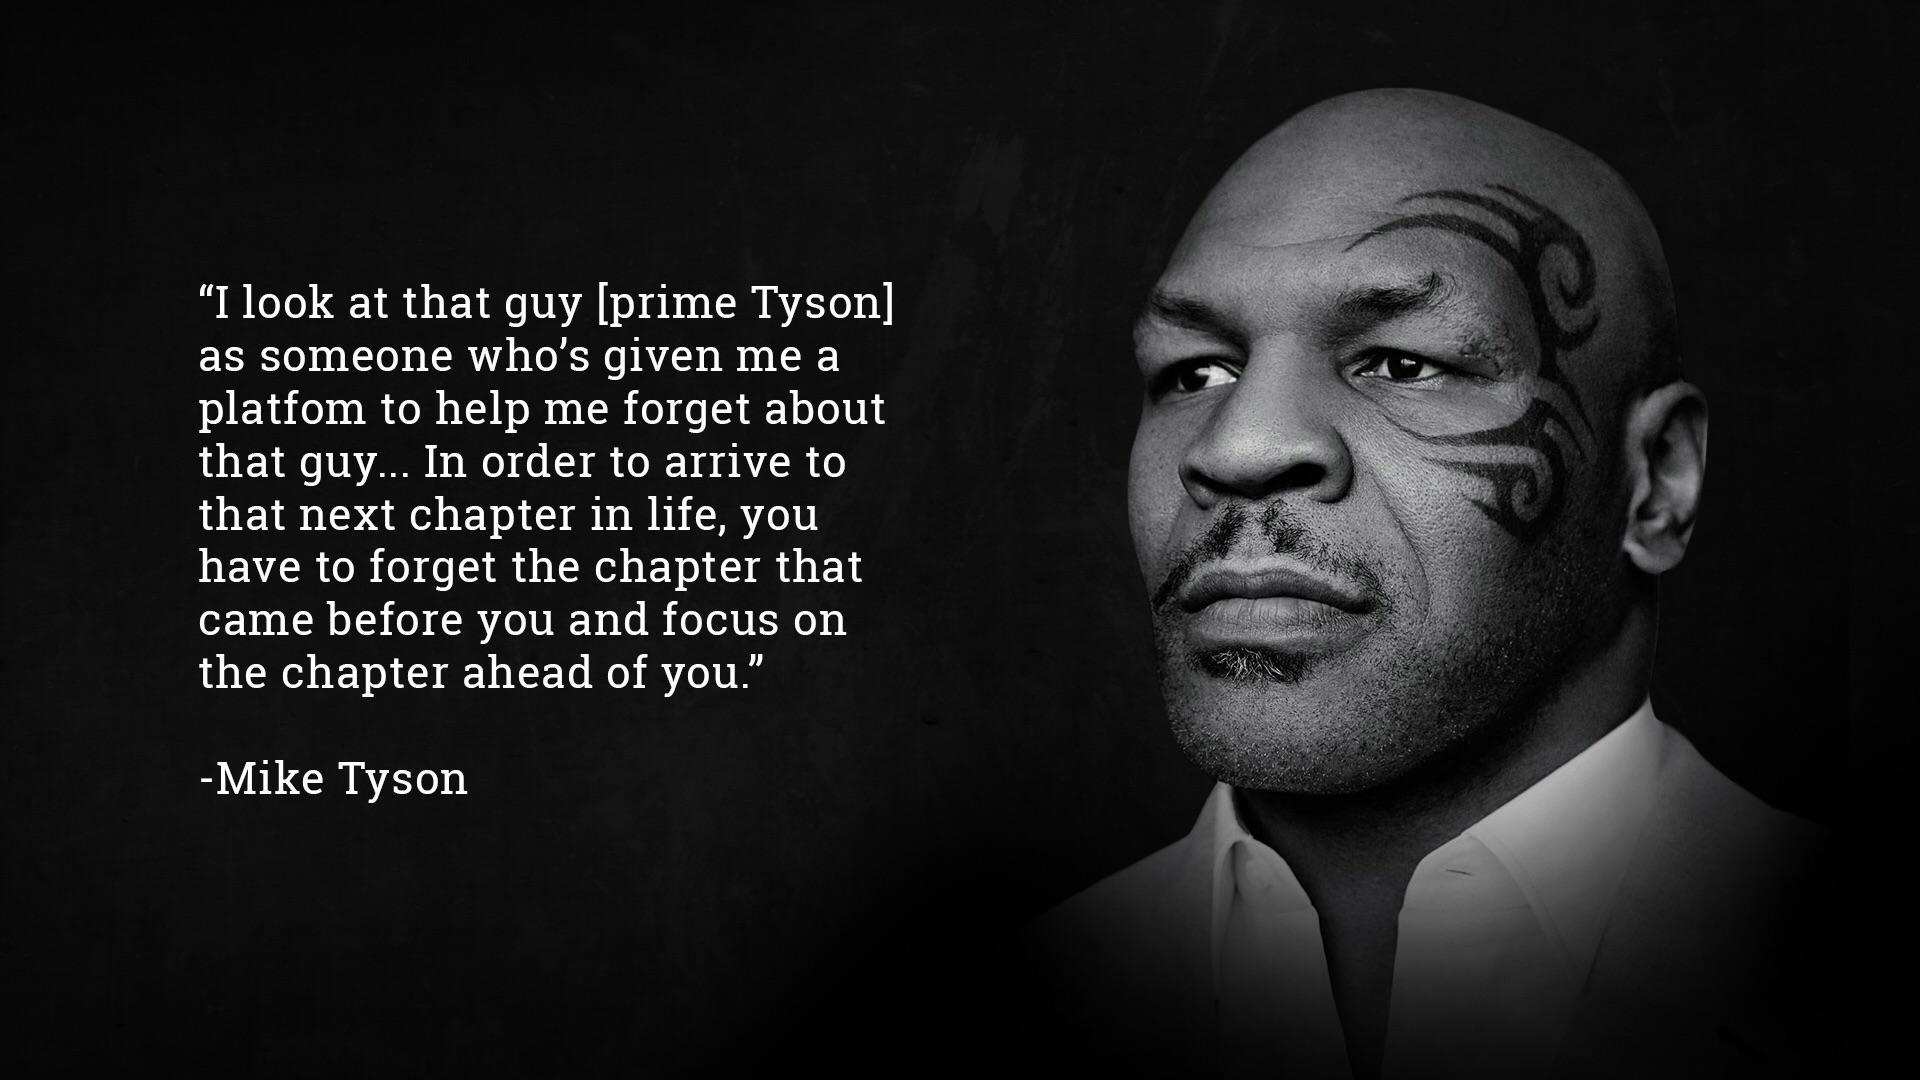 Mike Tyson Quotes Wallpapers - Tattoo Ideas For Women